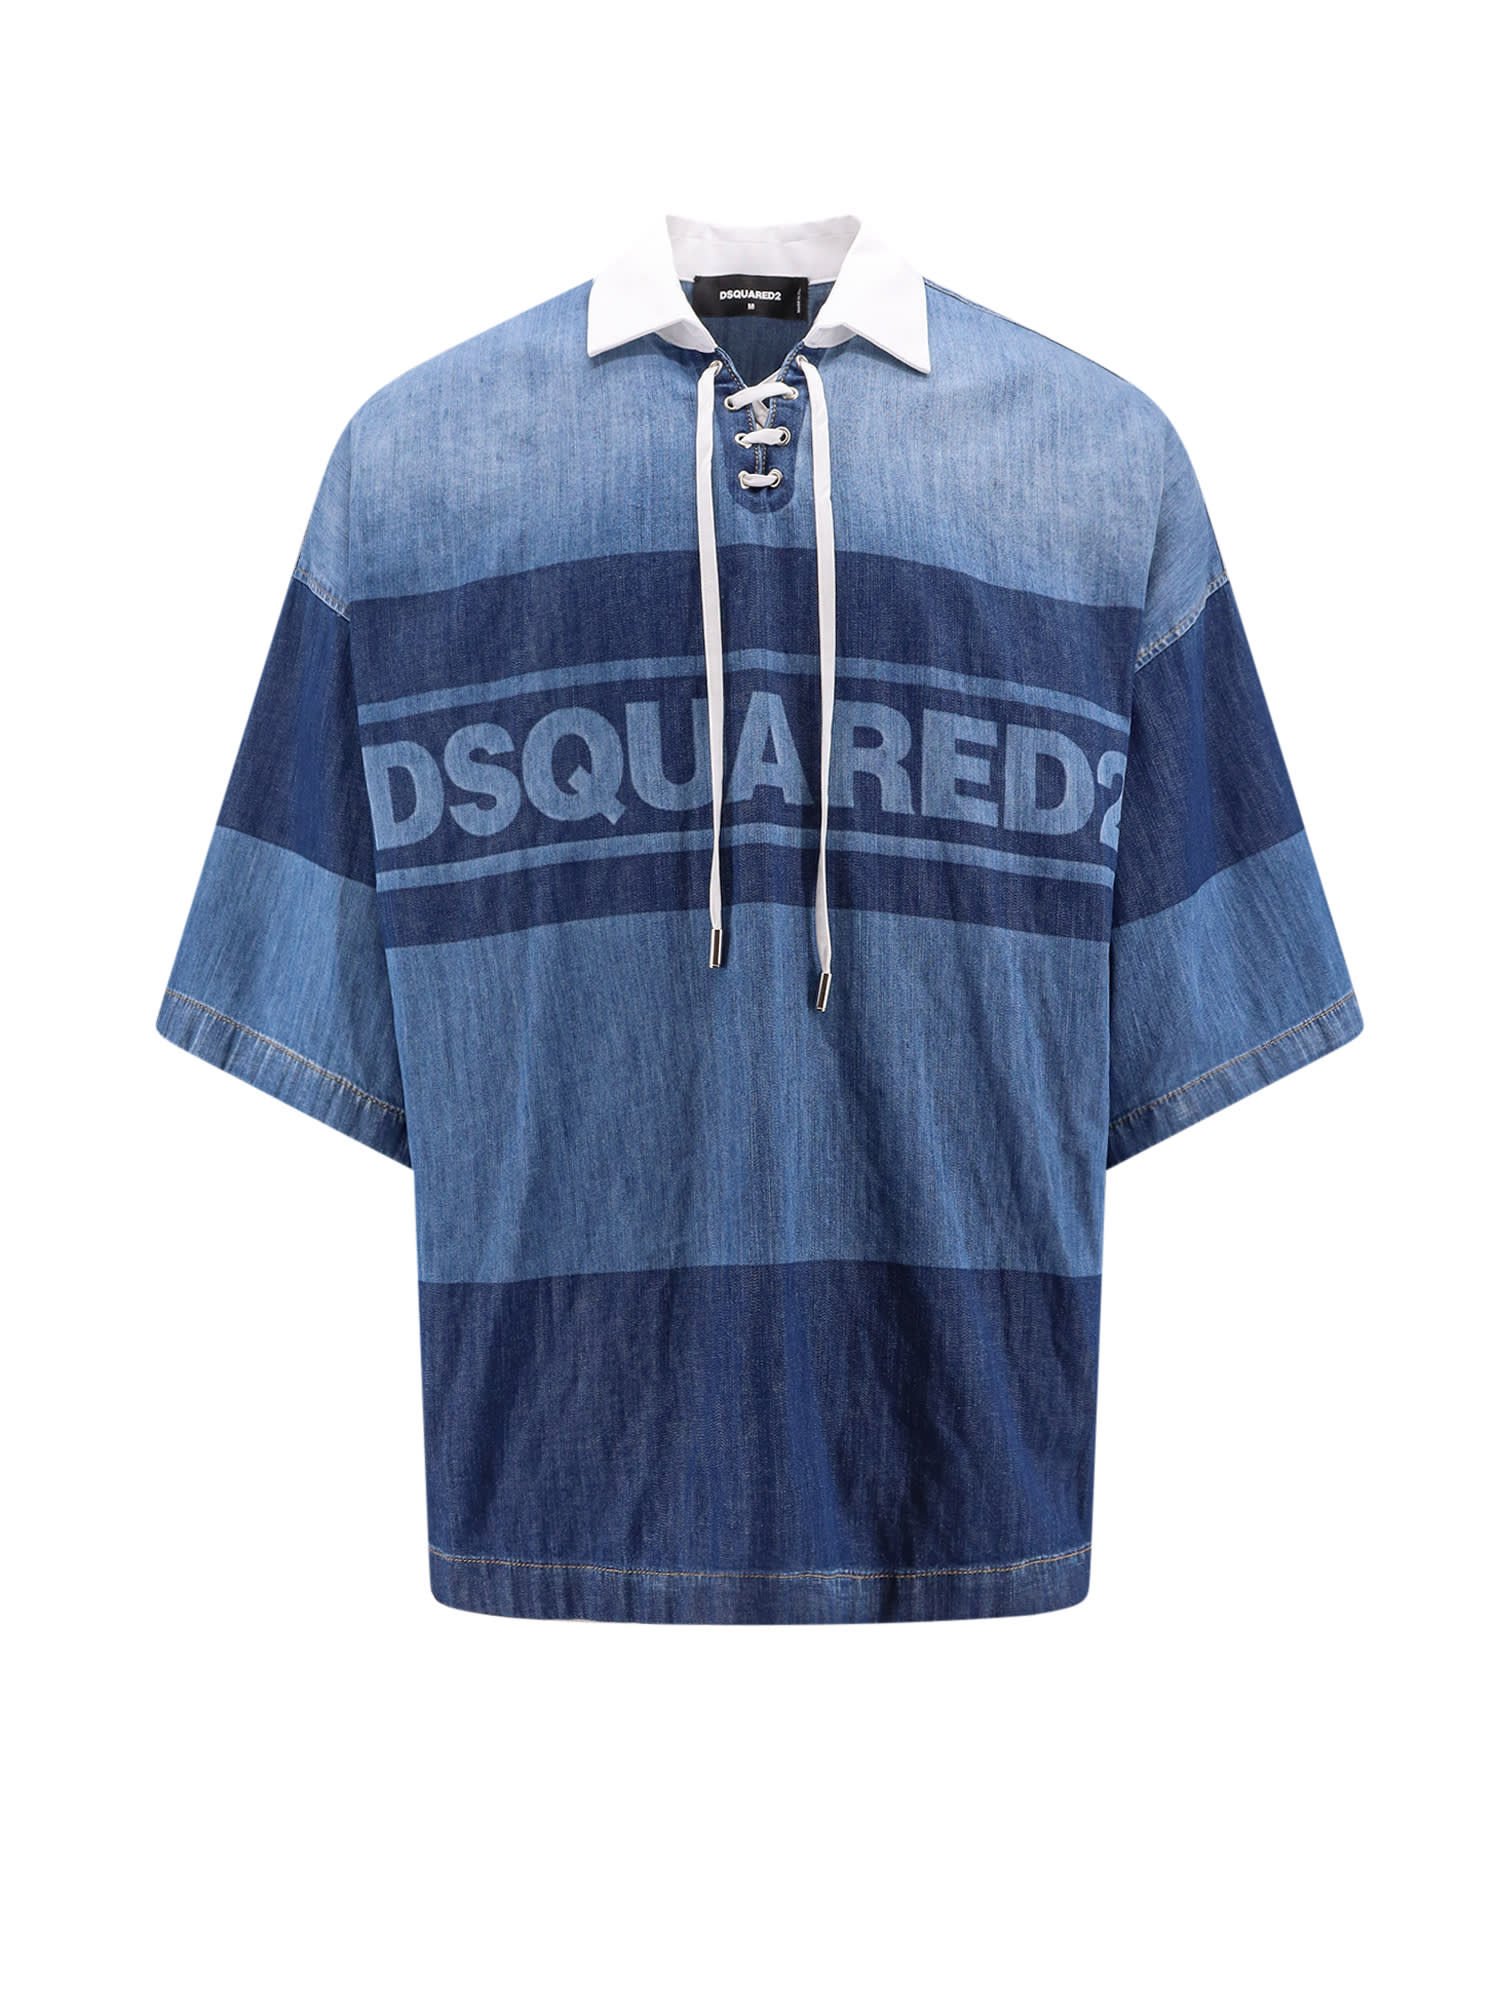 DSQUARED2 DENIM RUGBY POLO SHIRT